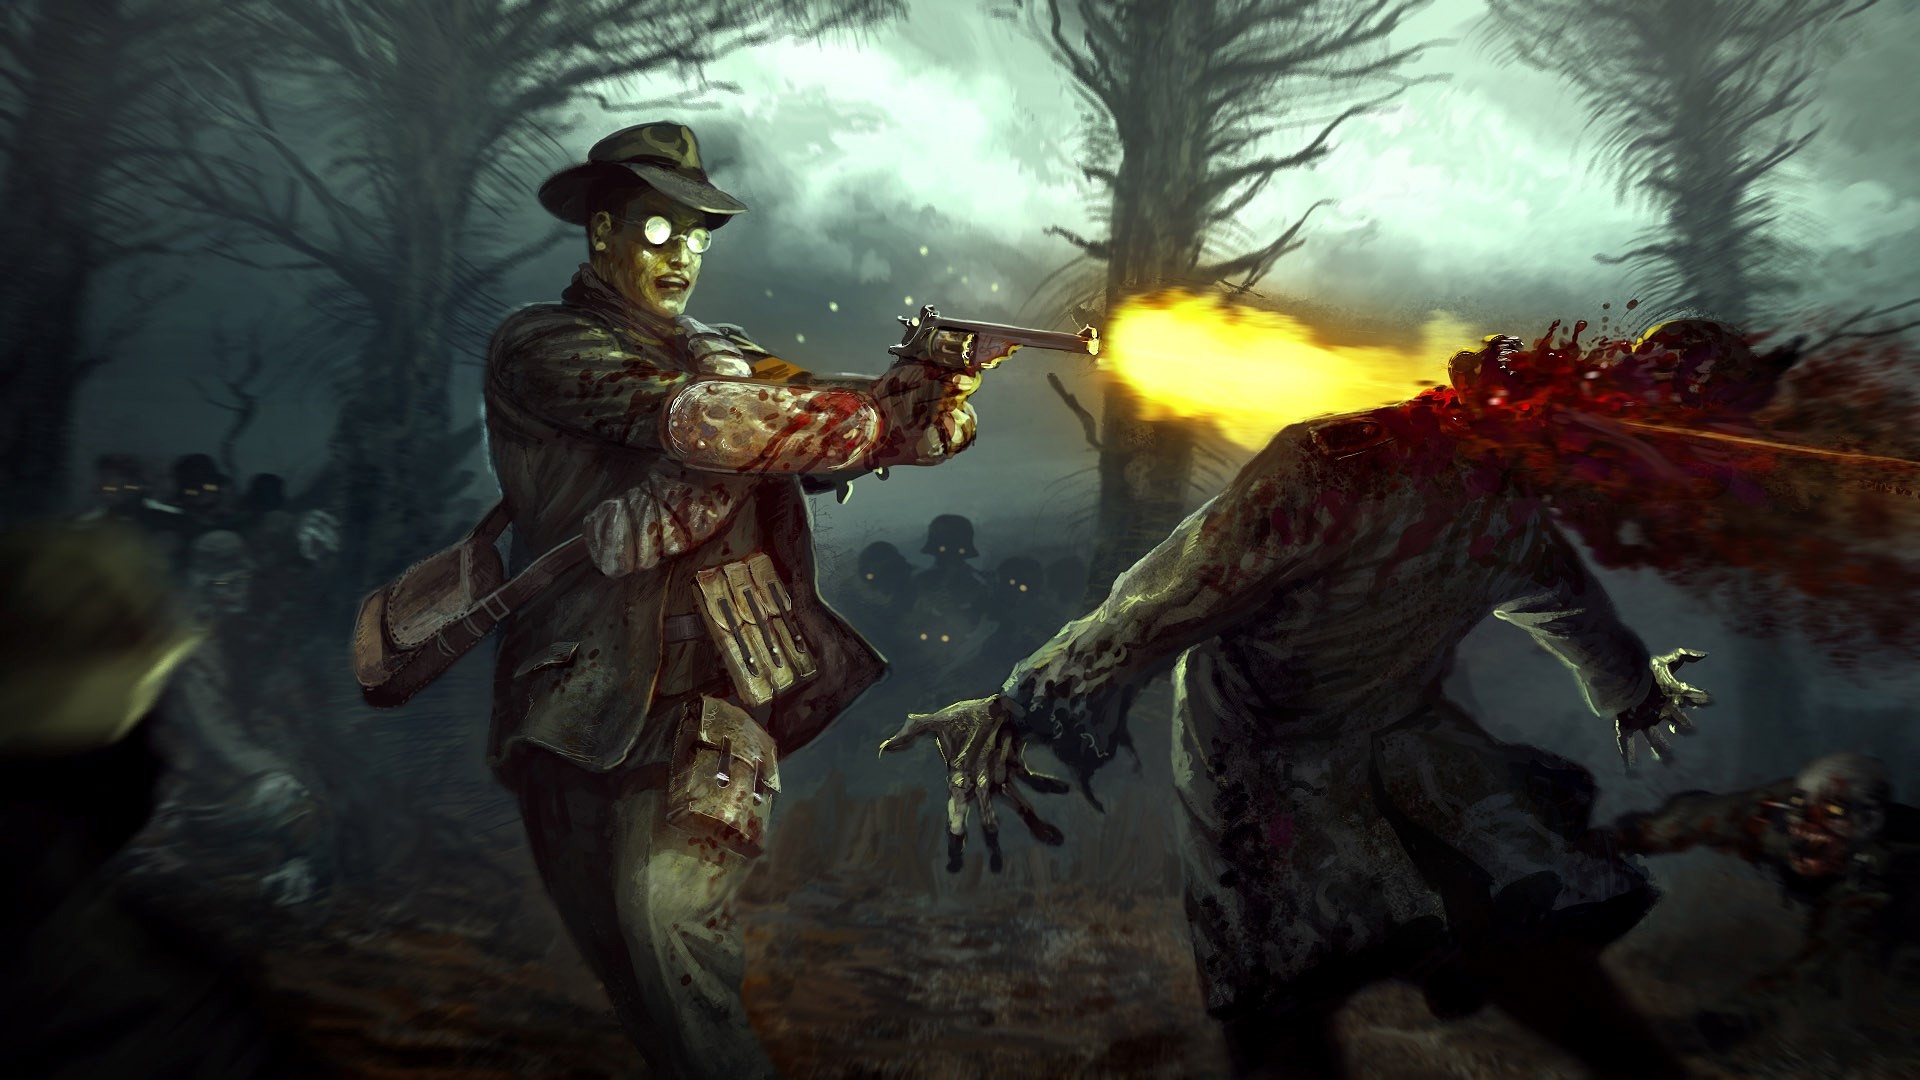 1920x1080 zombie army trilogy : image, wall, pic